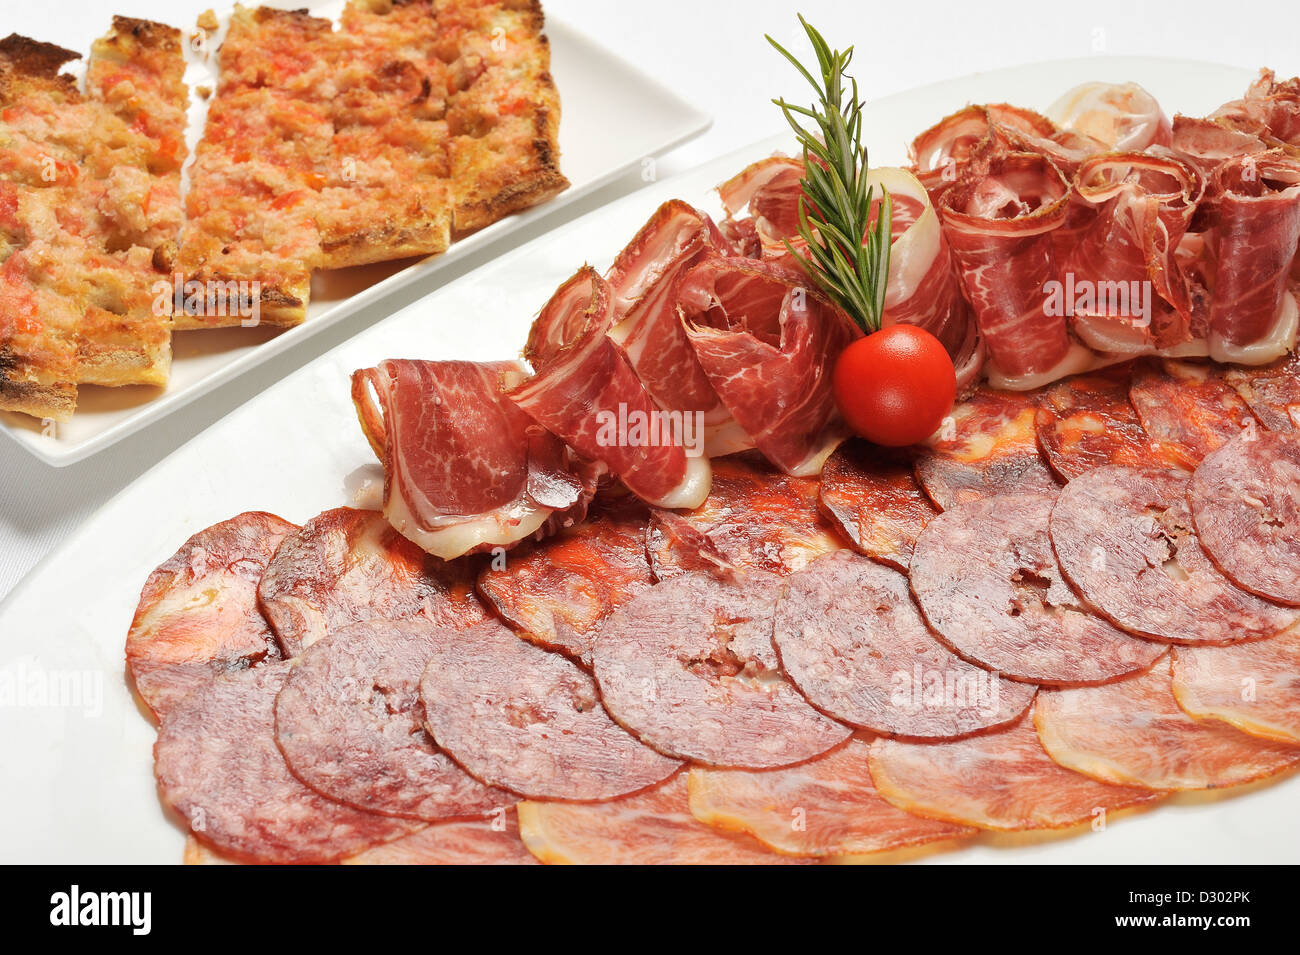 assortment of sliced cold meats Stock Photo